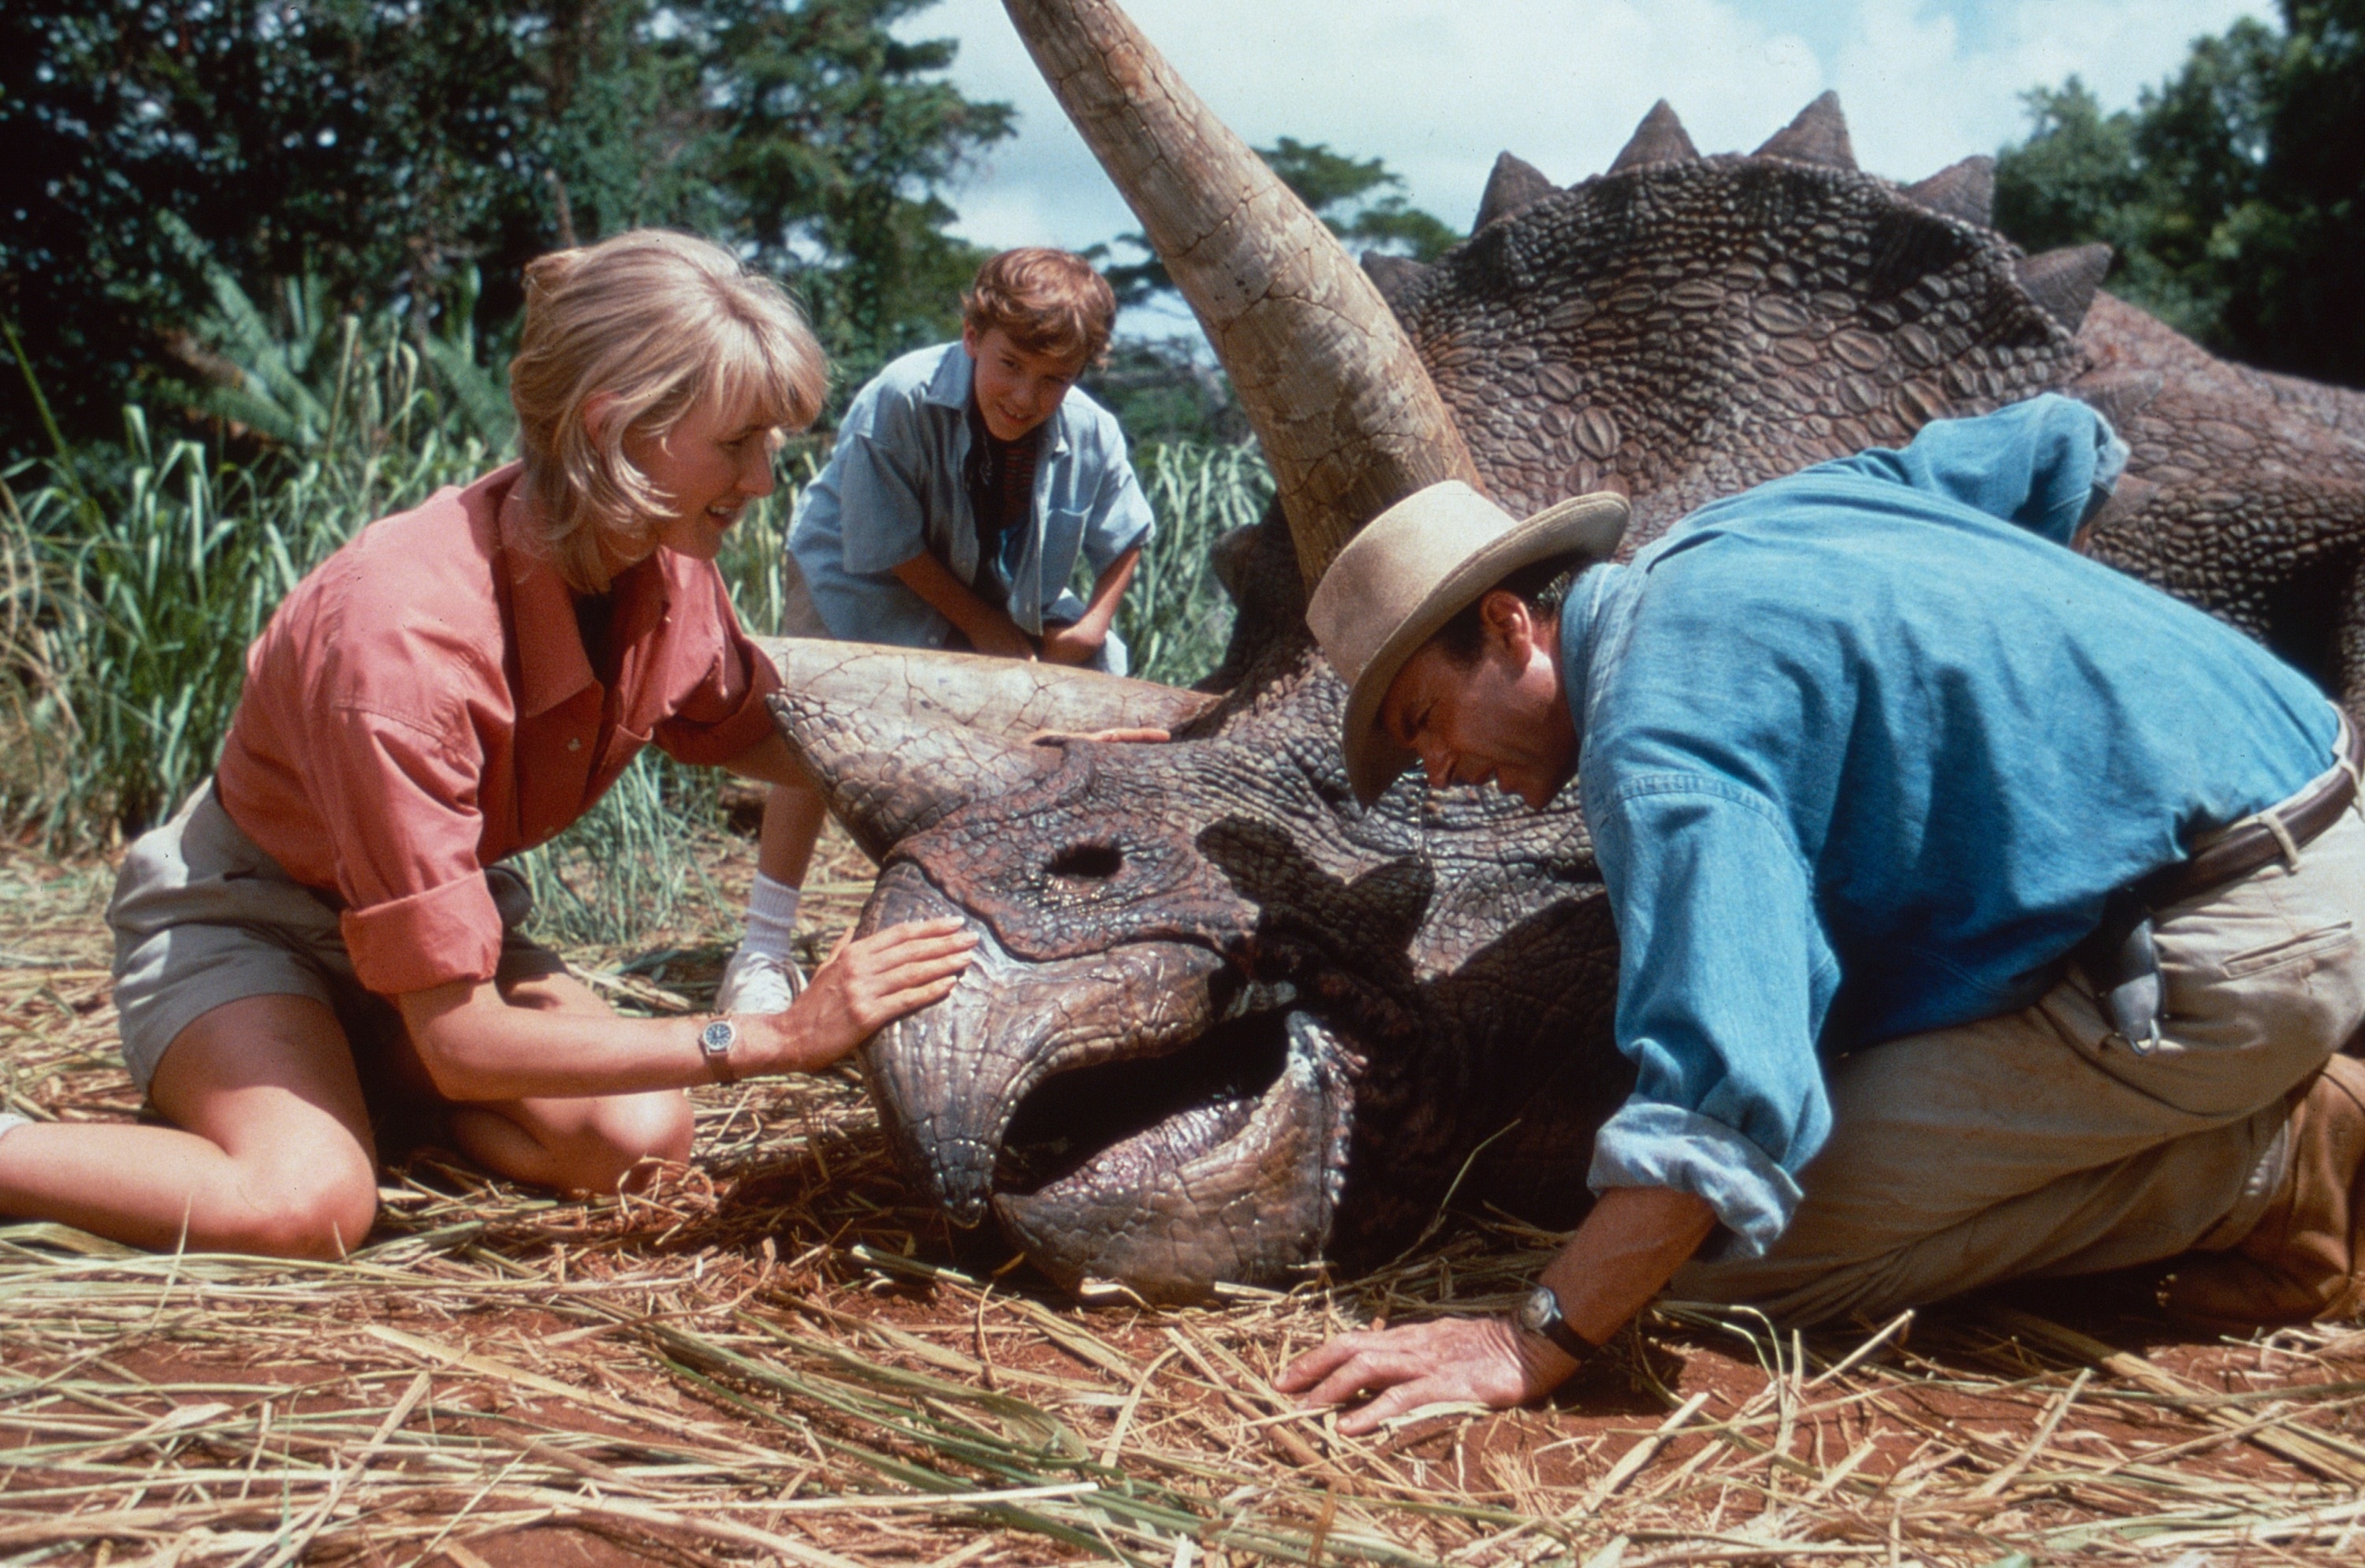 Three individuals, including characters Dr. Ellie Sattler and Dr. Alan Grant, attending to a sick Triceratops in a scene from Jurassic Park